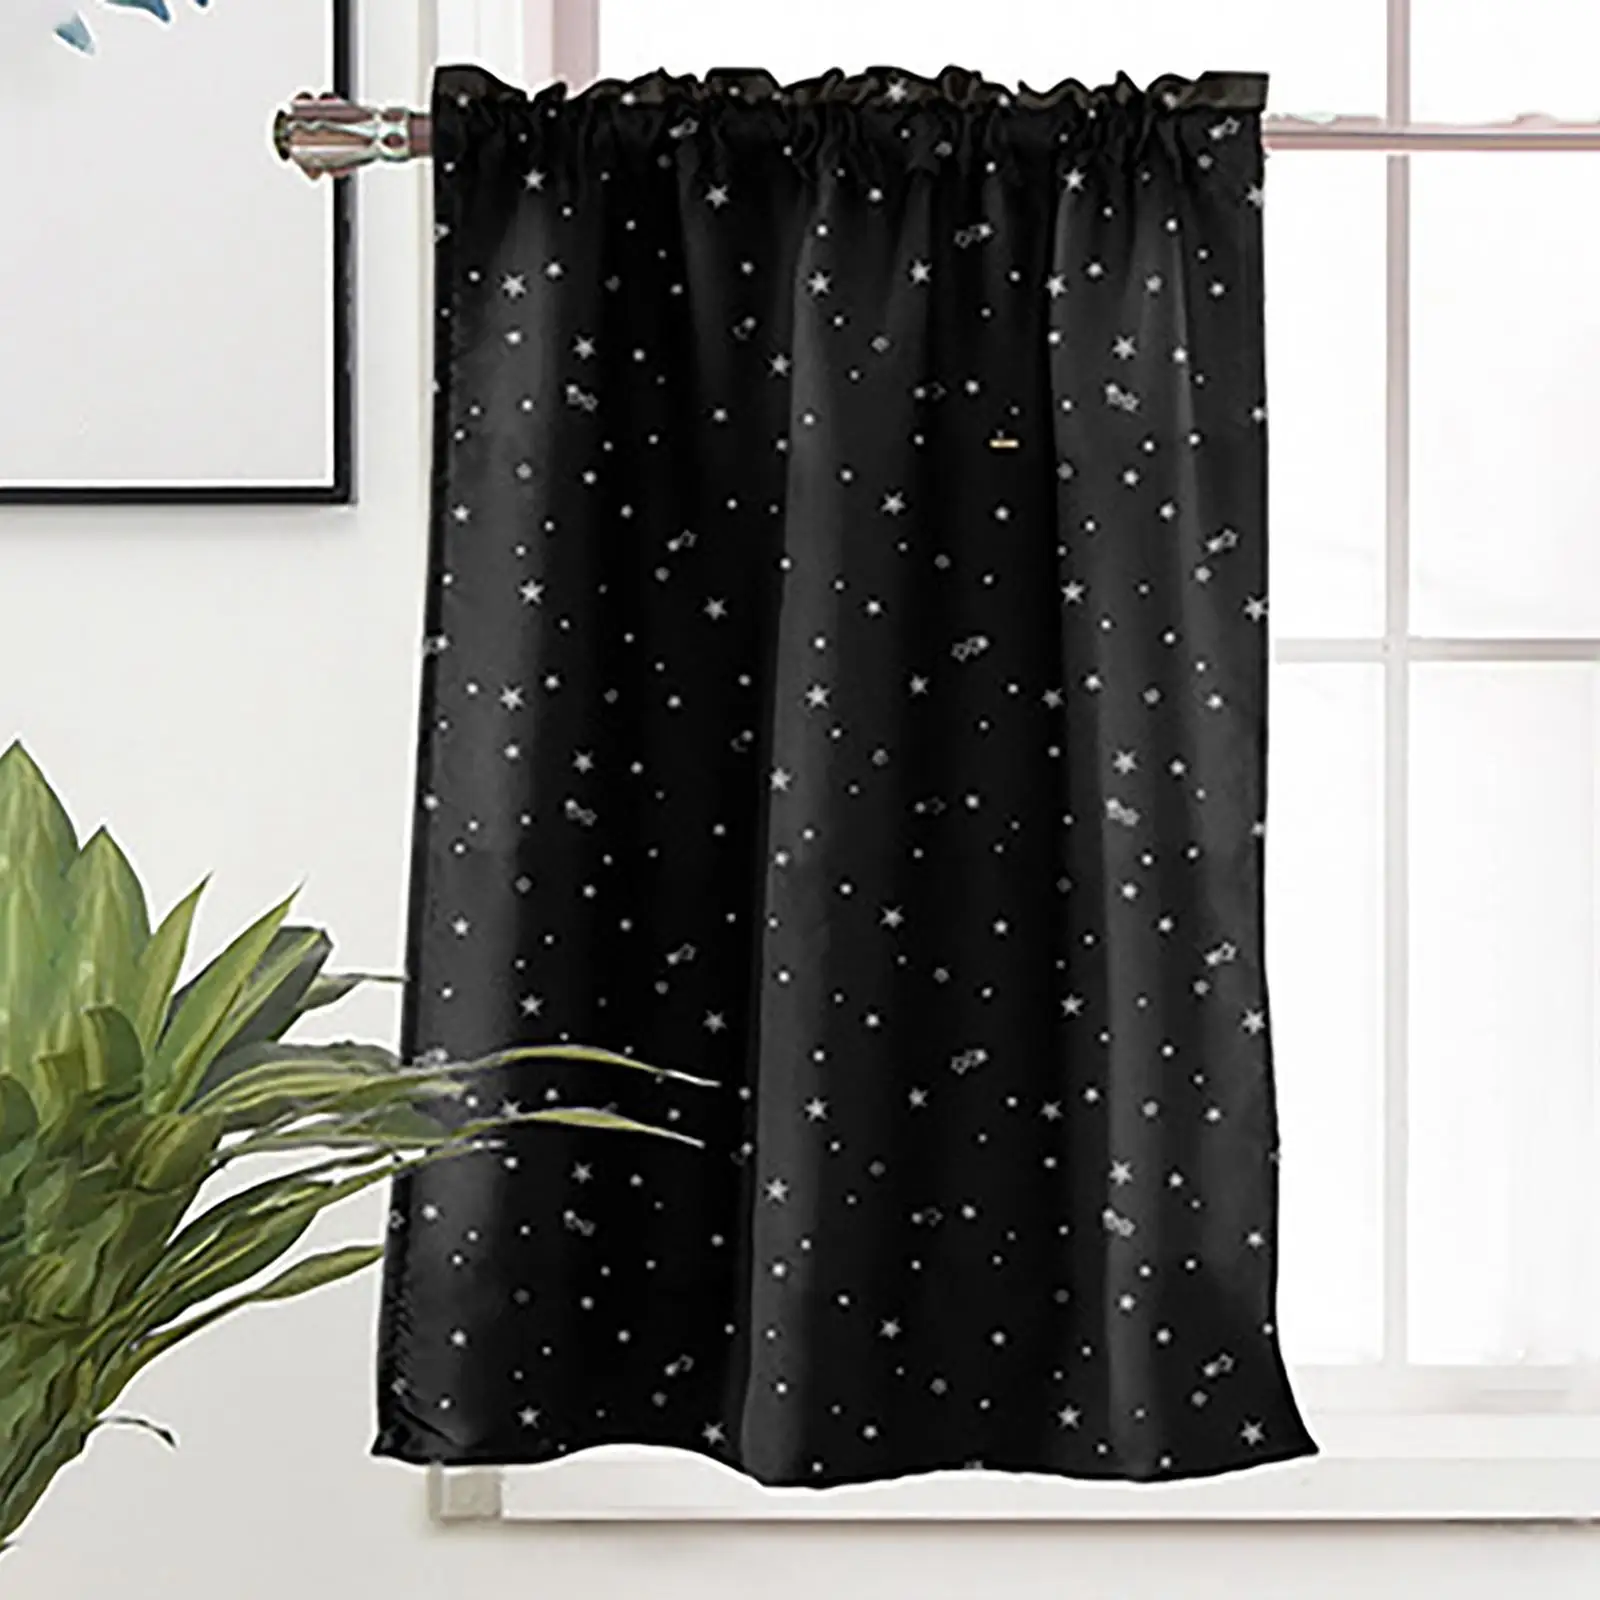 1 Panel Curtain Cutout Printed Window Curtains Drapes Treatment Grommet Curtains for Dining Room Study Nursery